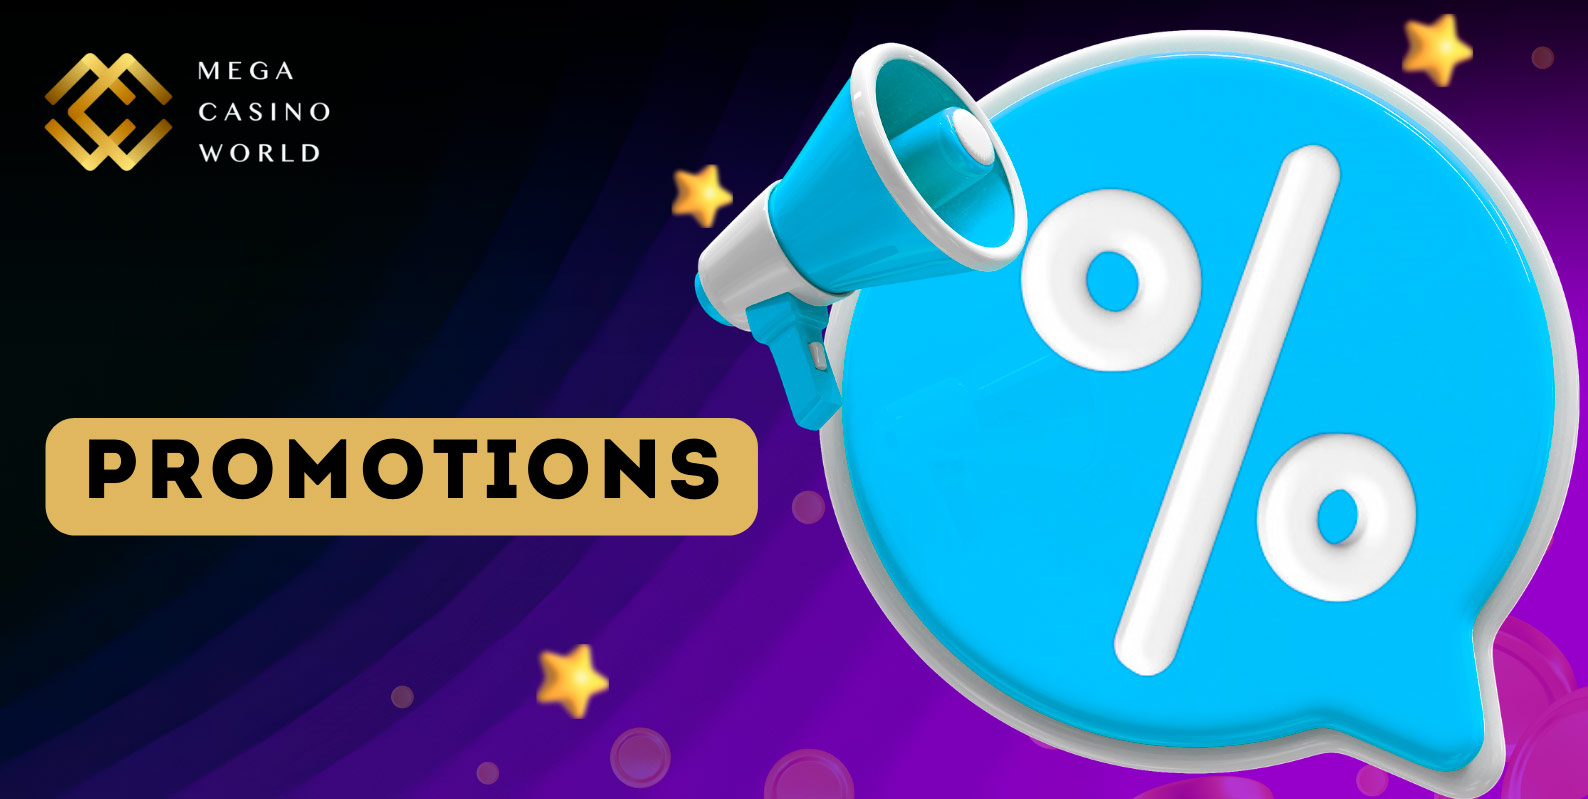 MCW Promotions: Find the Best Bonuses for Casino Games